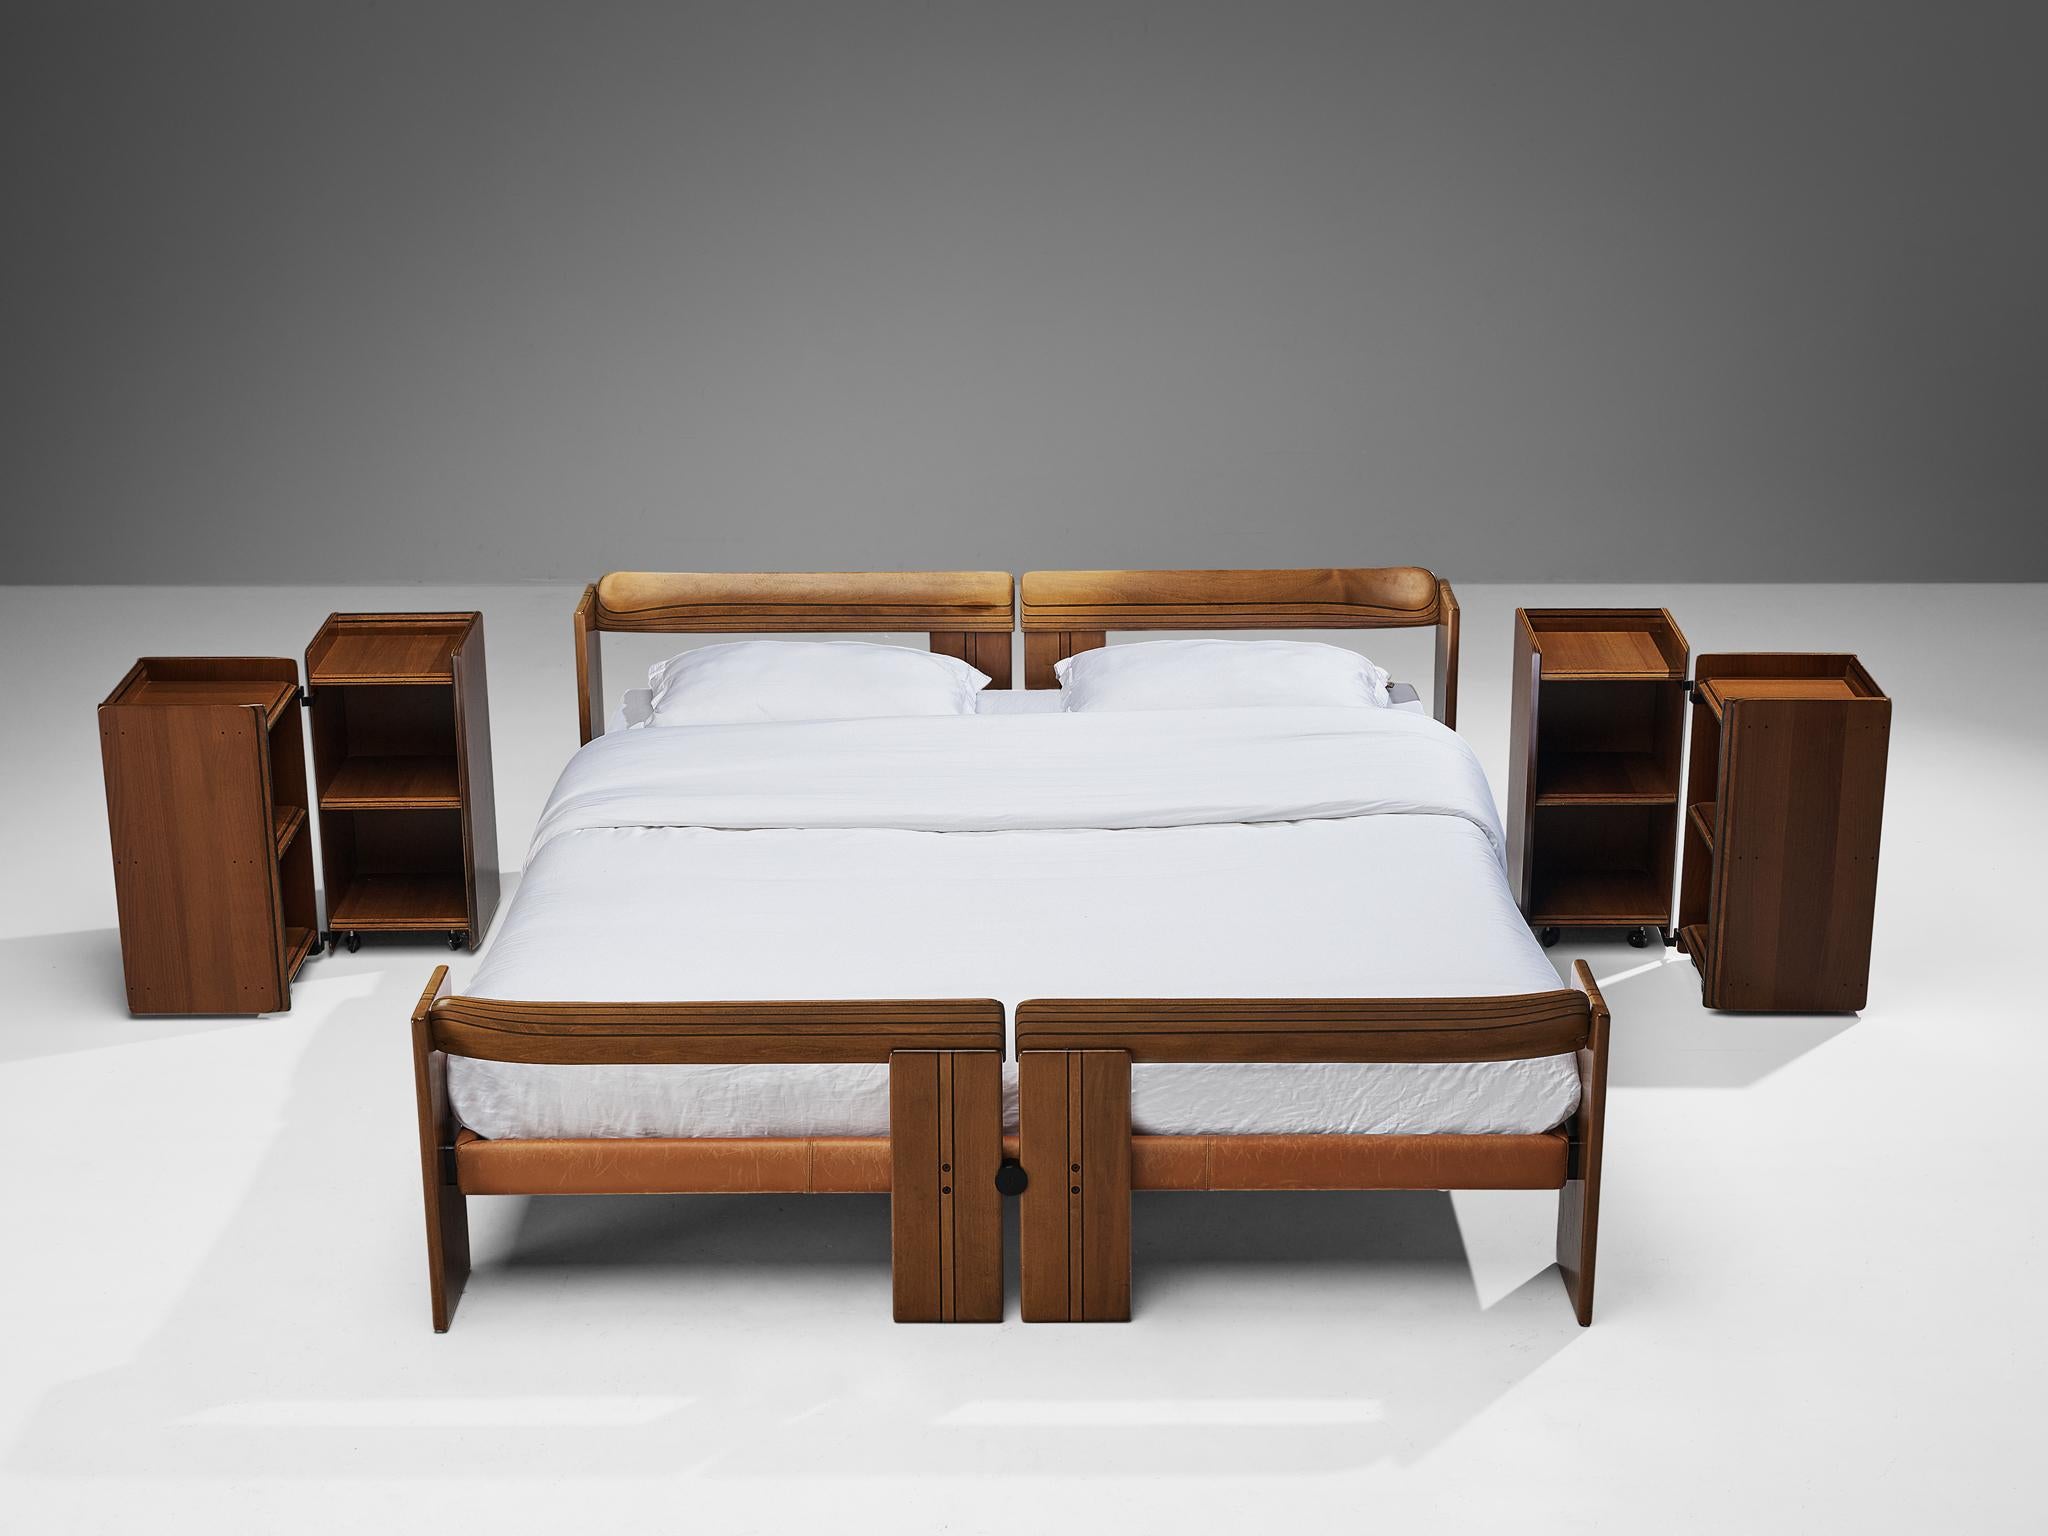 Afra & Tobia Scarpa, pair of 'Artona' nightstands, walnut and metal, Italy, circa 1975.

Pair of mobile cubic ‘Artona’ night stands by Italian designer couple Afra and Tobia Scarpa. A remarkable feature is that these items both consist out of two